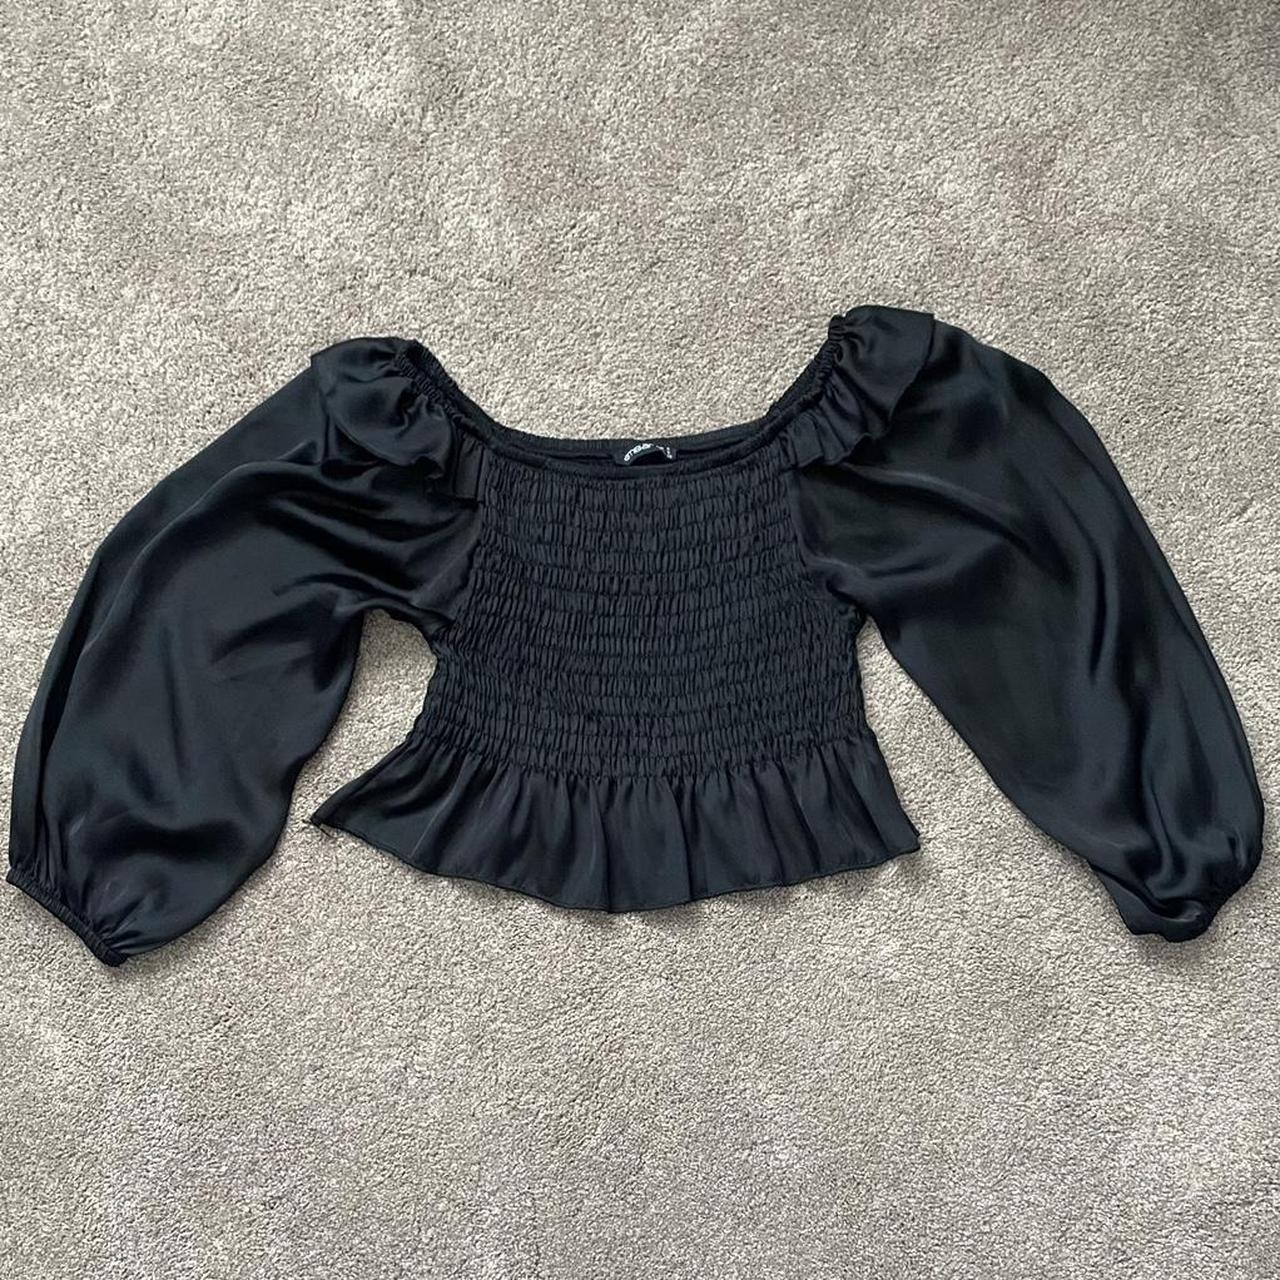 AMBAR Black Cropped Top Off the shoulder Cute for... - Depop